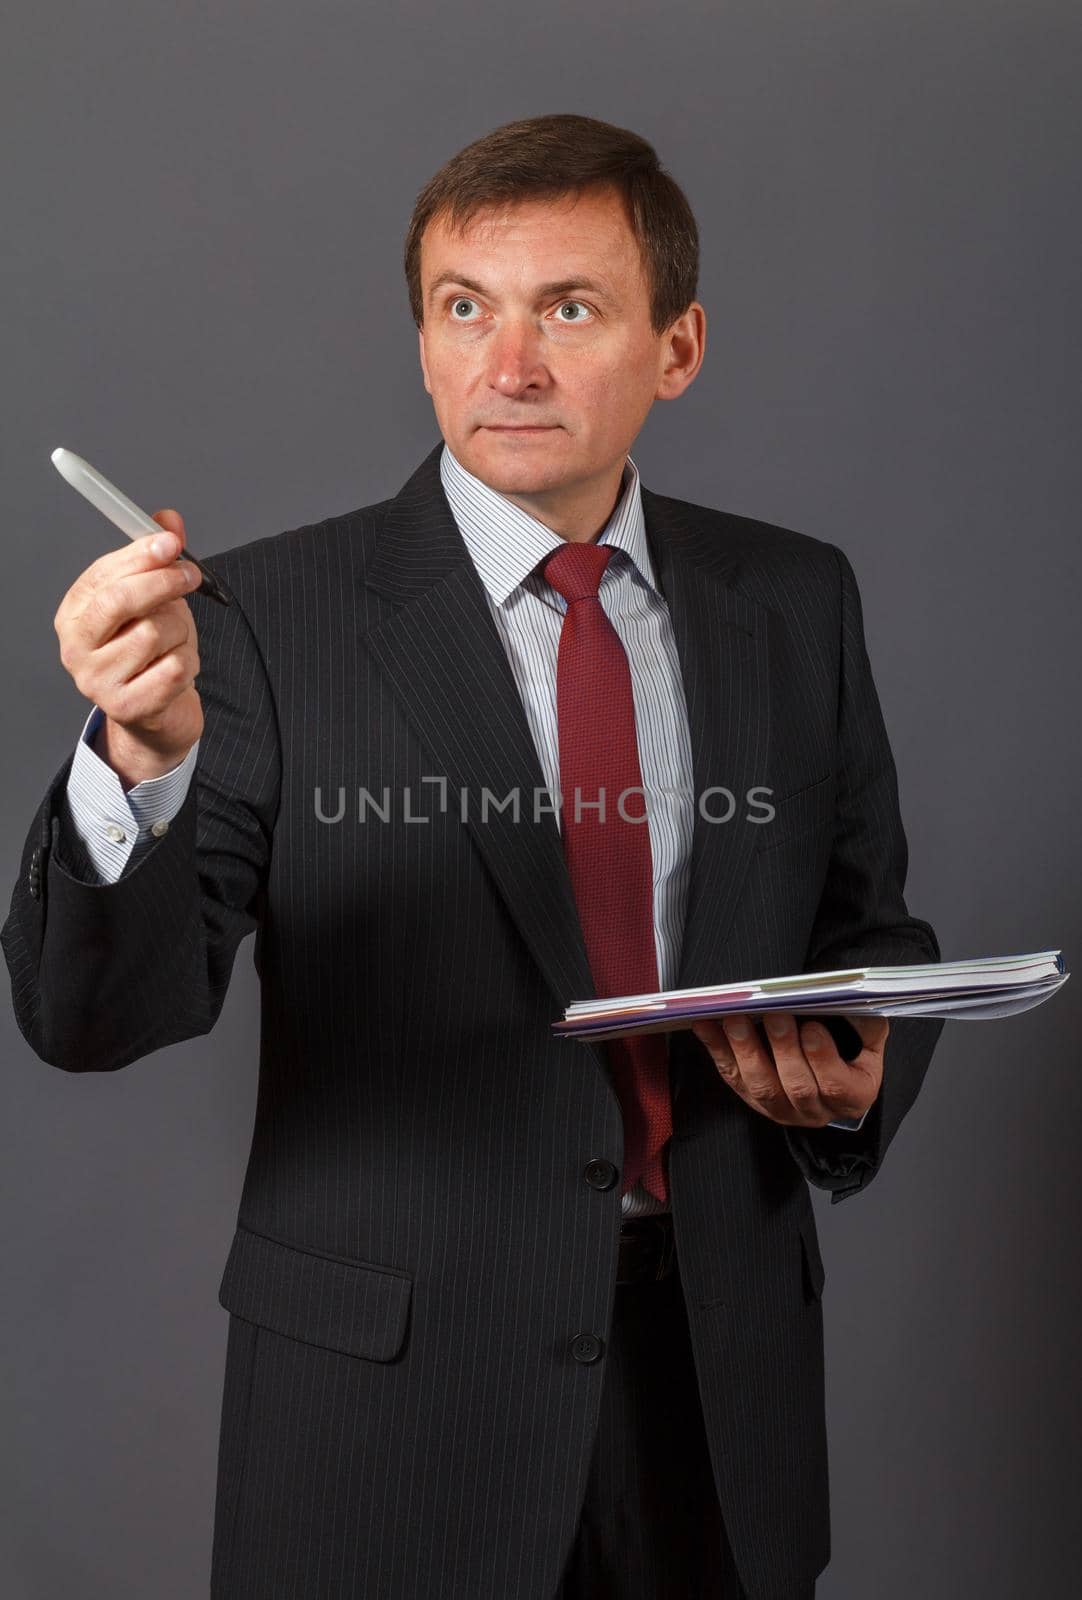 Confident and friendly elegant handsome mature businessman standing in front of a gray background holding a marker and a notebook